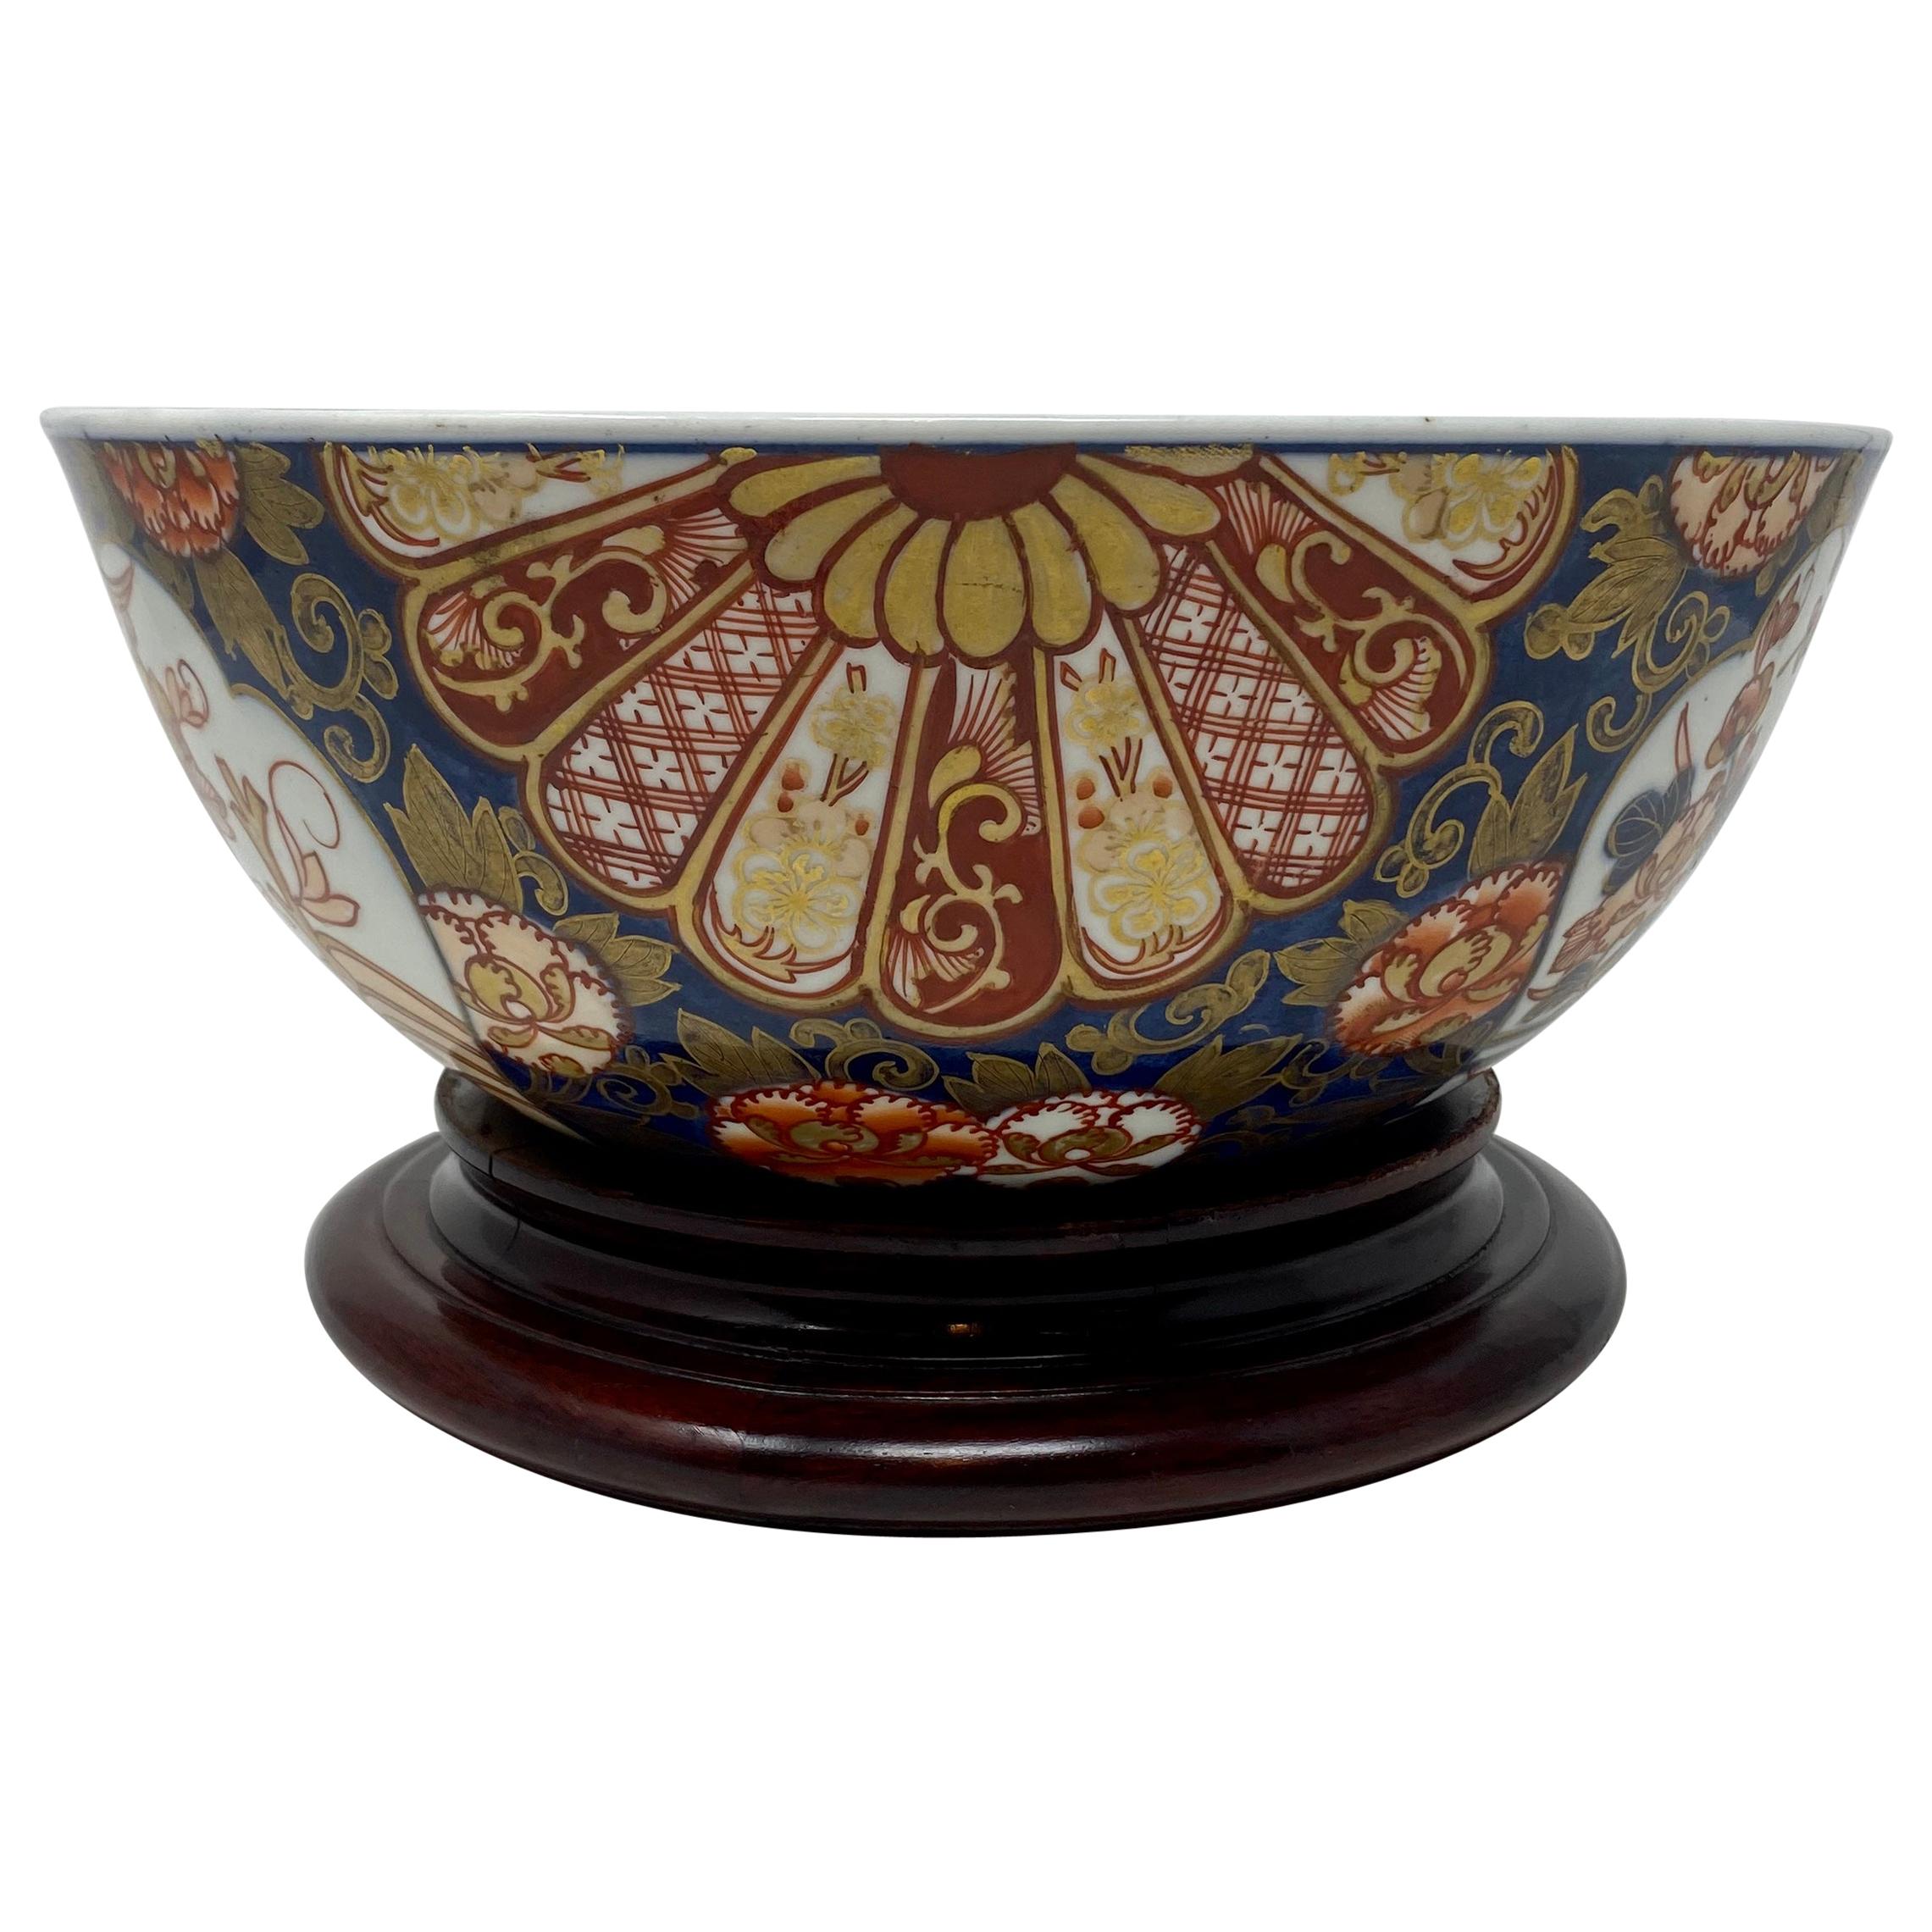 Antique Japanese Imari Bowl on Wooden Stand